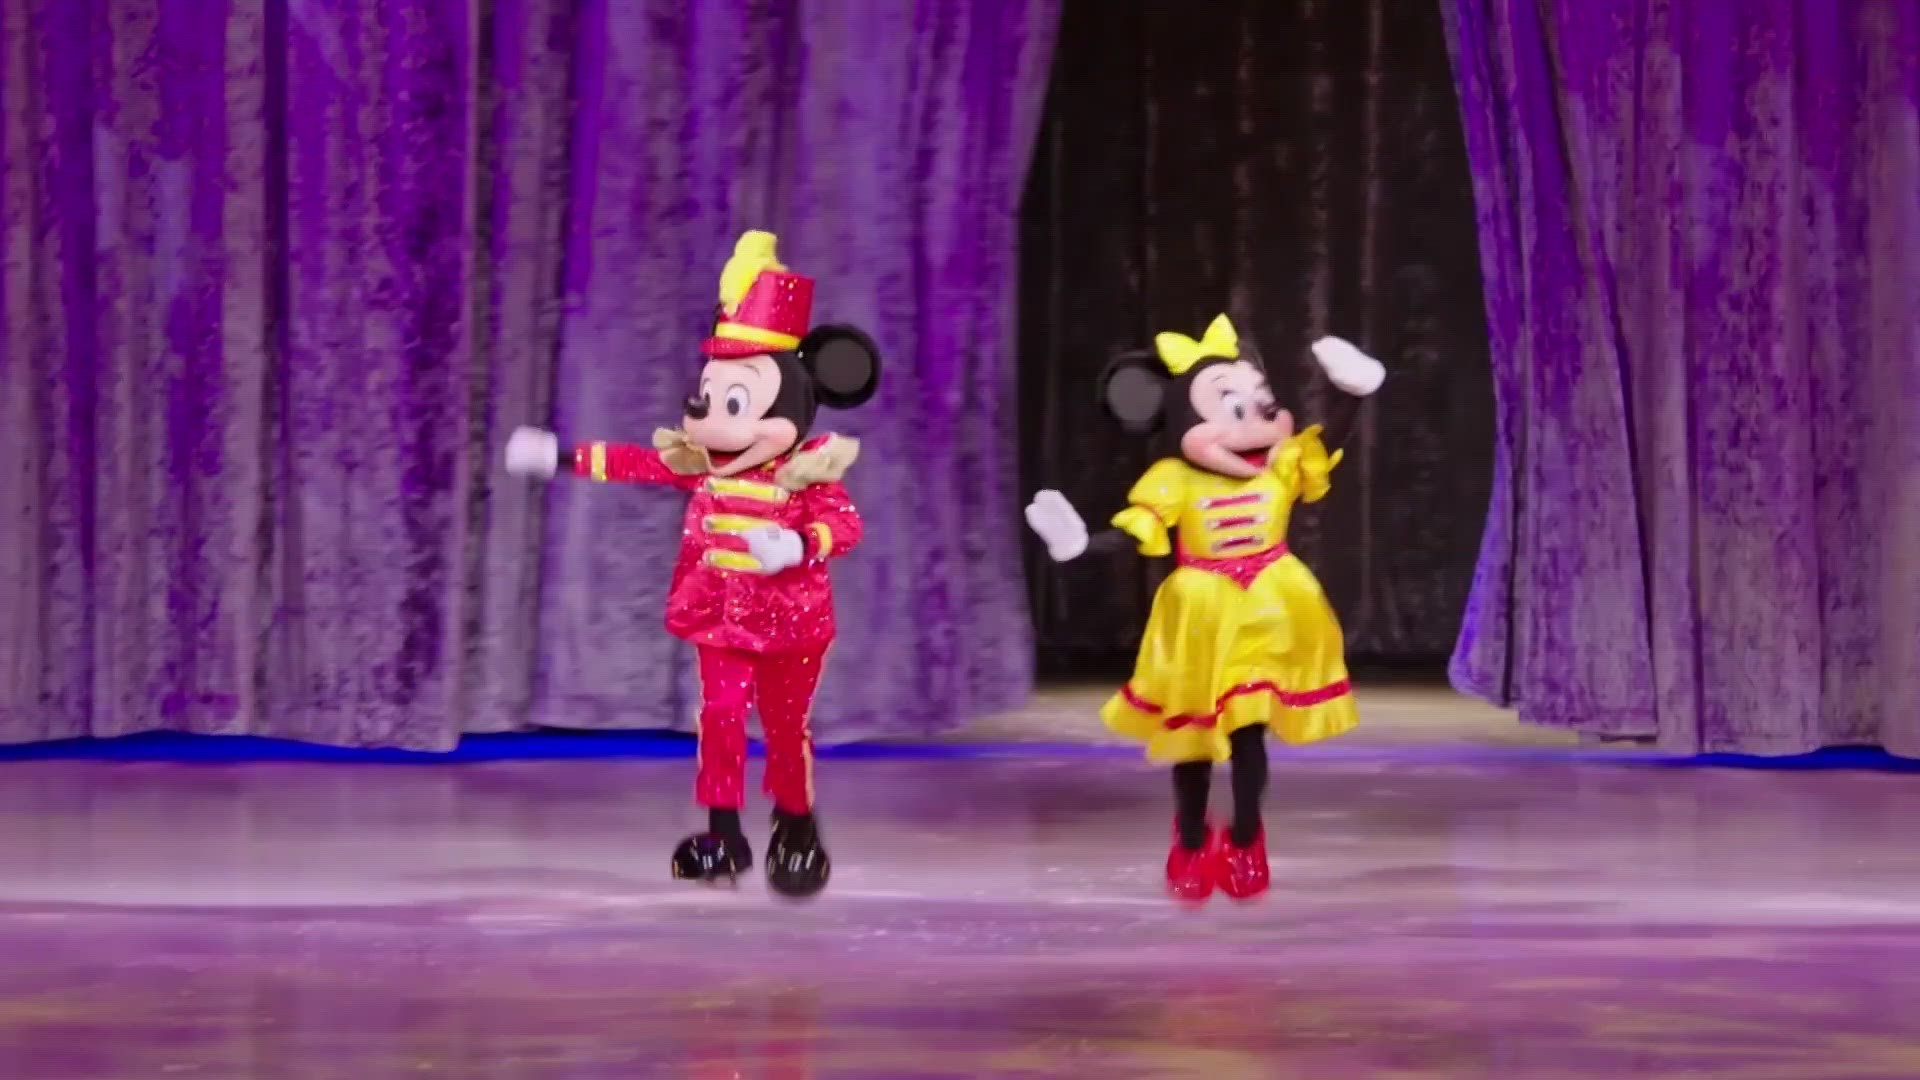 Kathleen O'Neil with Disney on Ice talks about the "Let's Celebrate" show happening this weekend at the Denver Coliseum.